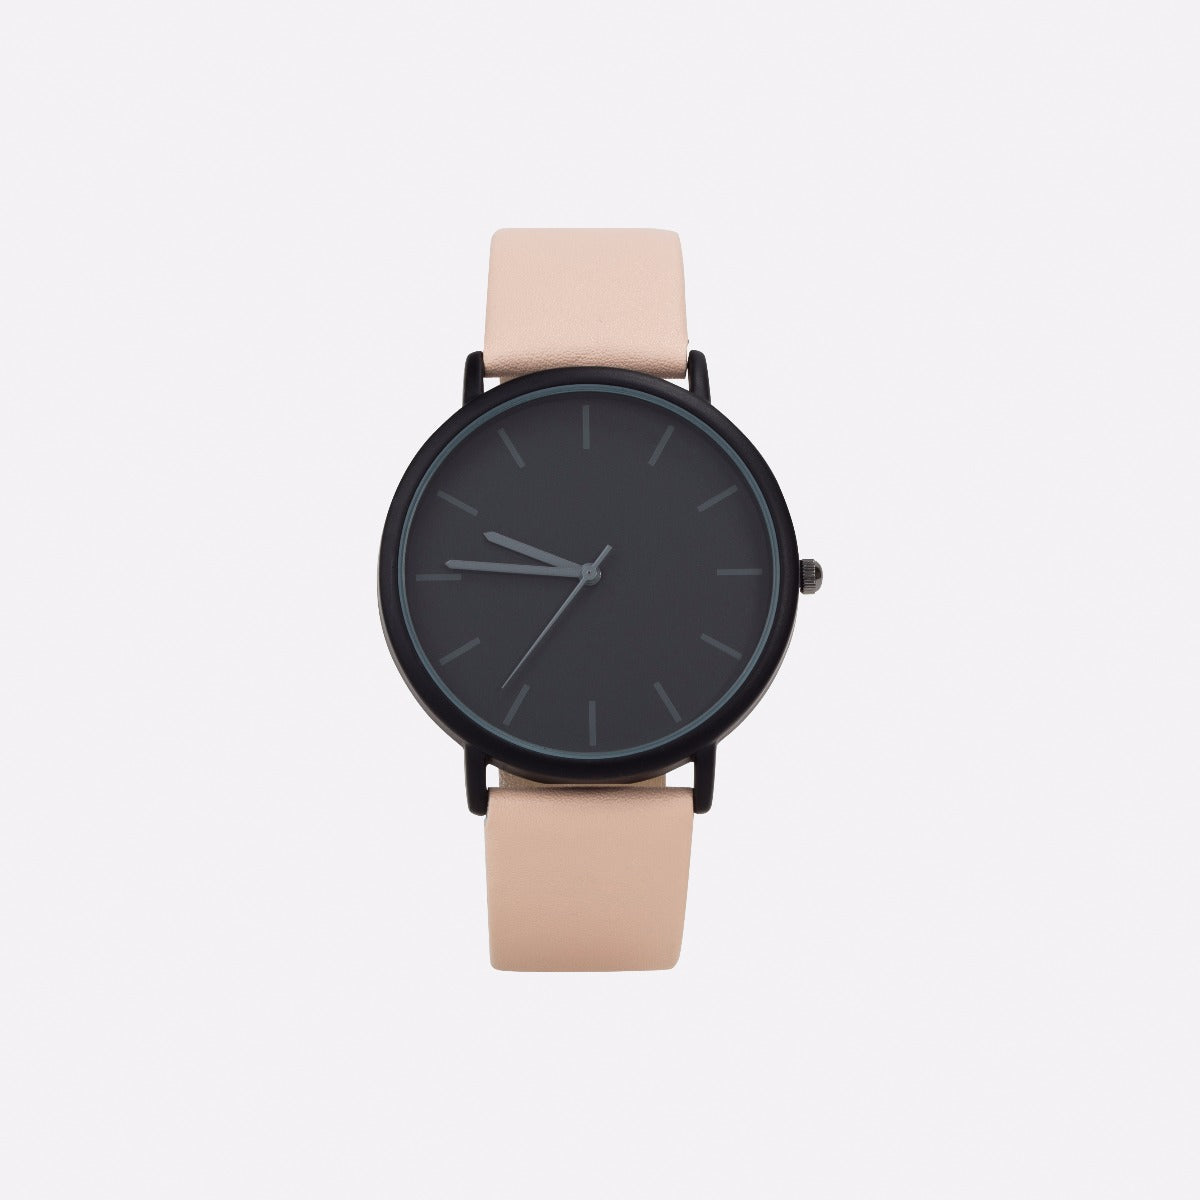 Innova collection - watch with pale pink bracelet and black dial